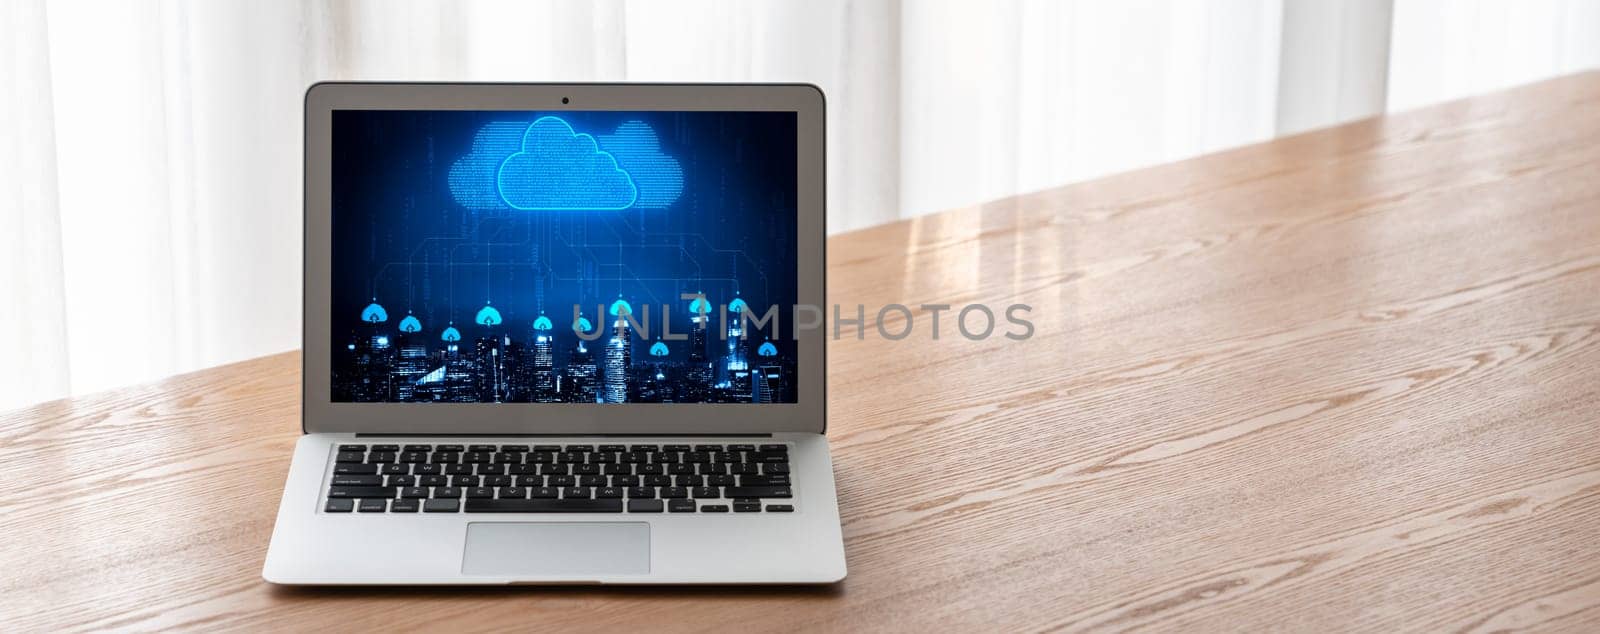 Cloud computing software for modish remote work and personal data storage